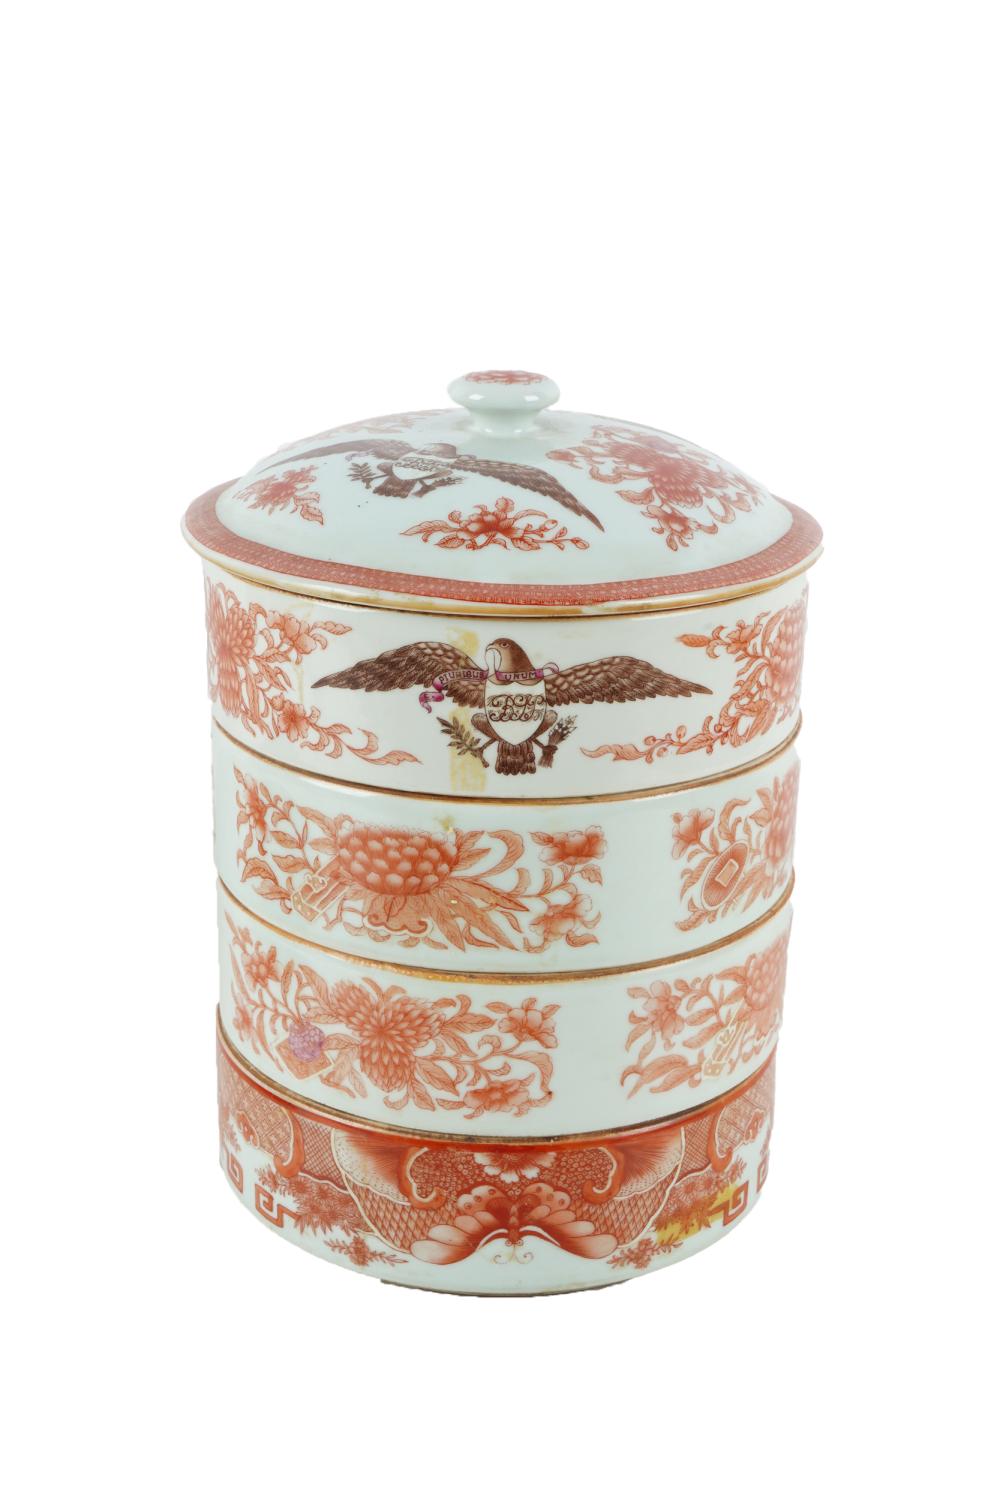 CHINESE EXPORT PORCELAIN AMERICAN